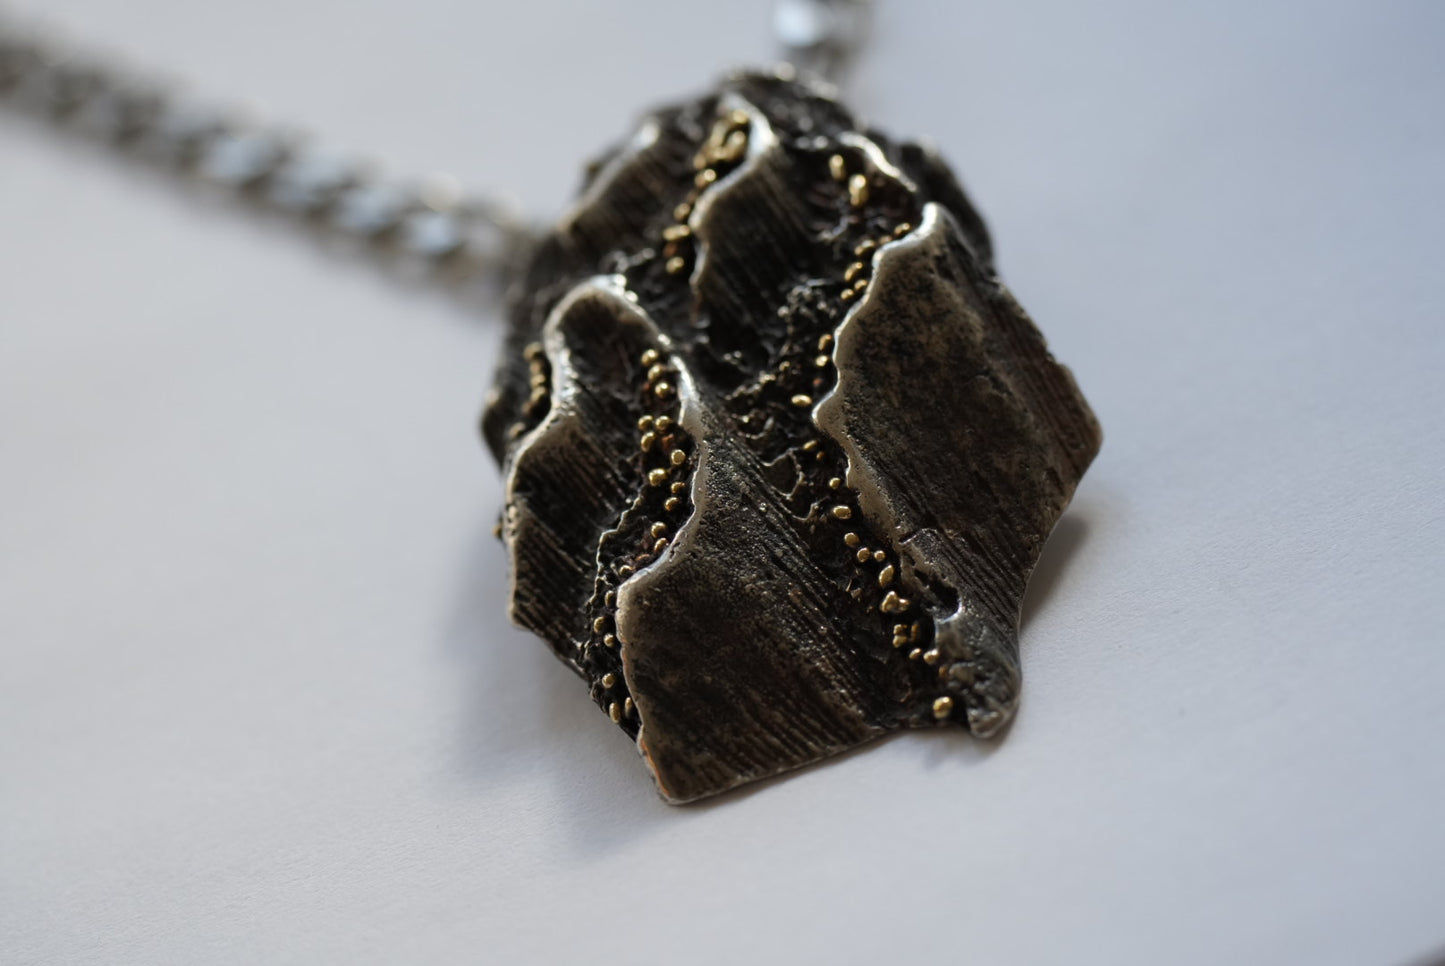 2023 - "Uplift" Brain Coral Imprint Sterling Pendant with 18k granulation by Jenn Dewey - FAIRMINED Silver & Gold